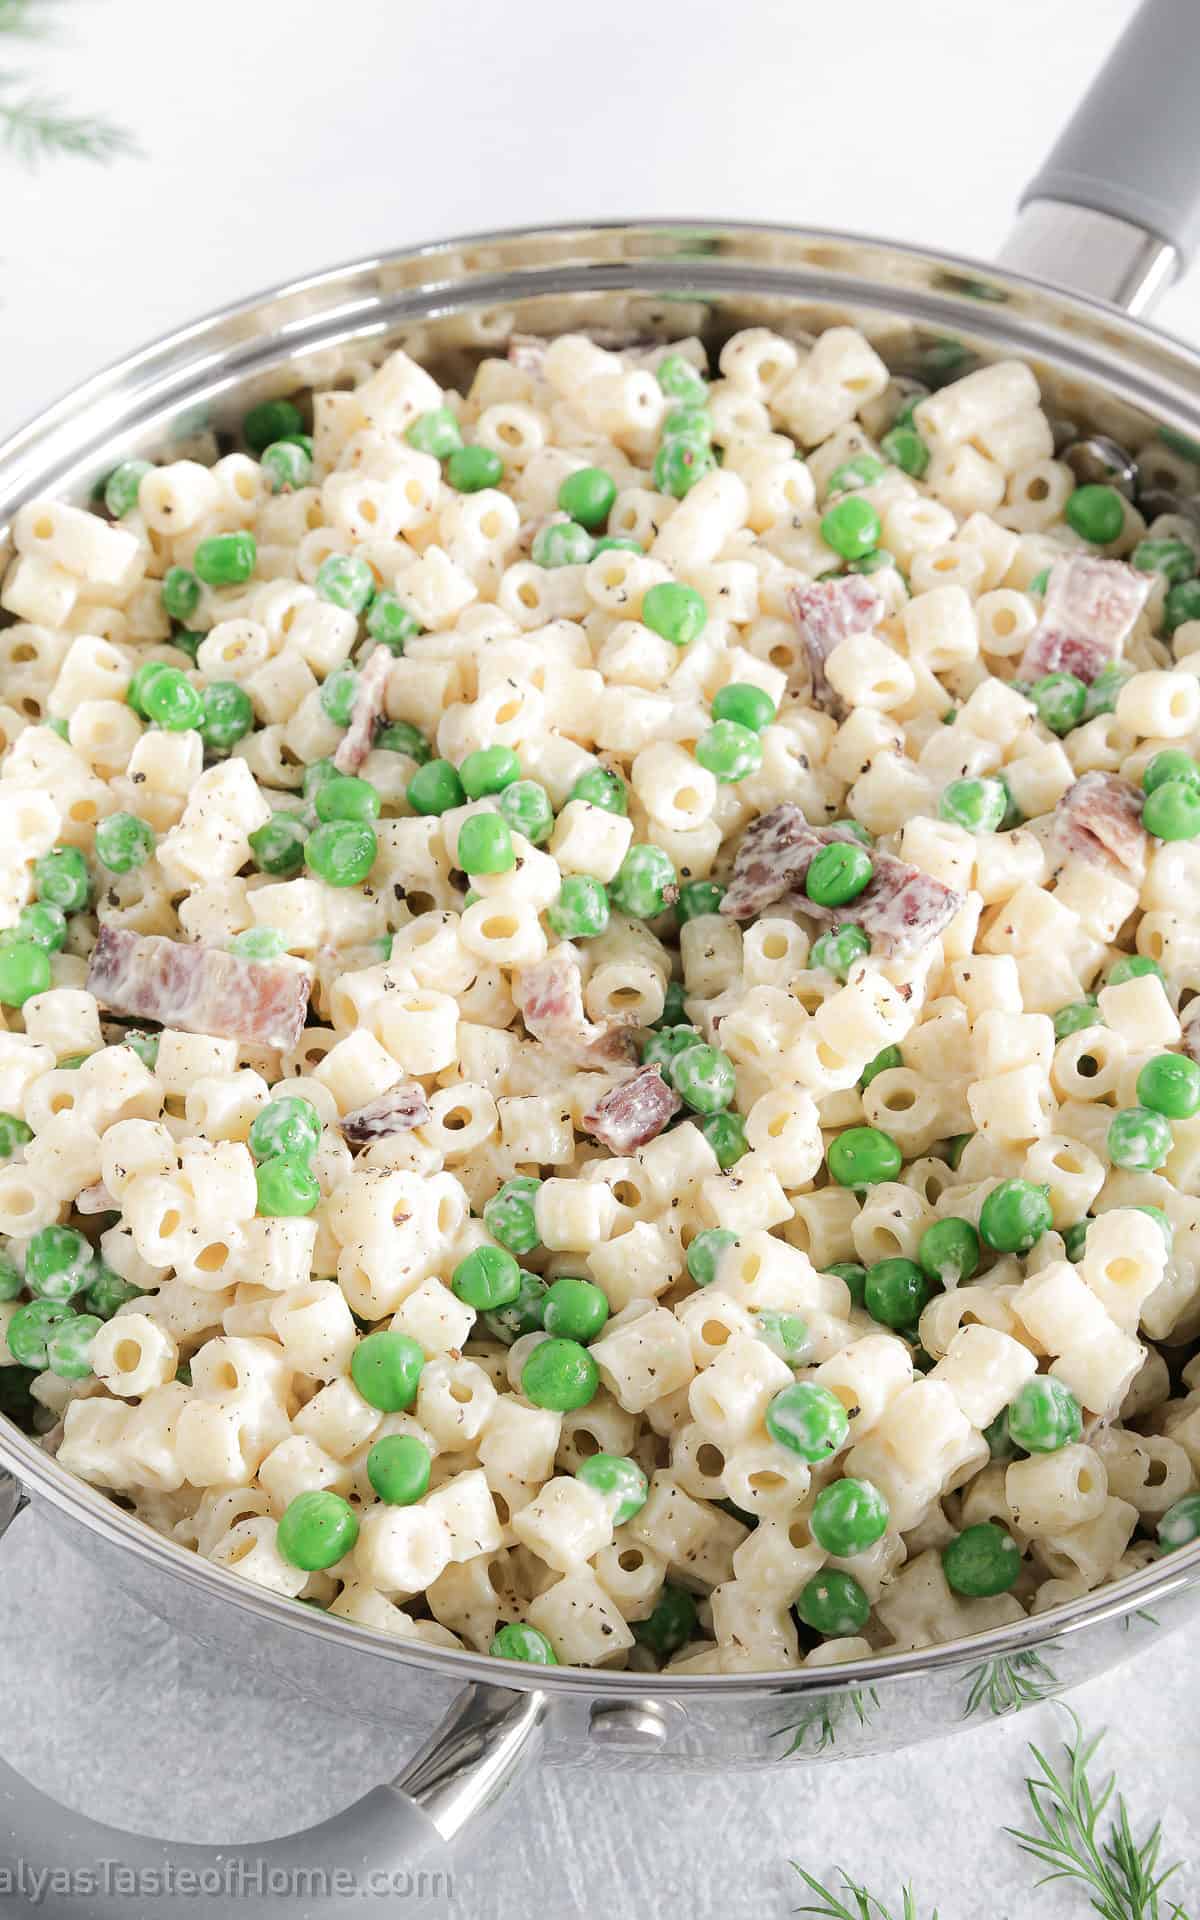 This pasta with bacon and peas recipe is special because it is so easy to make, yet still incredibly delicious.